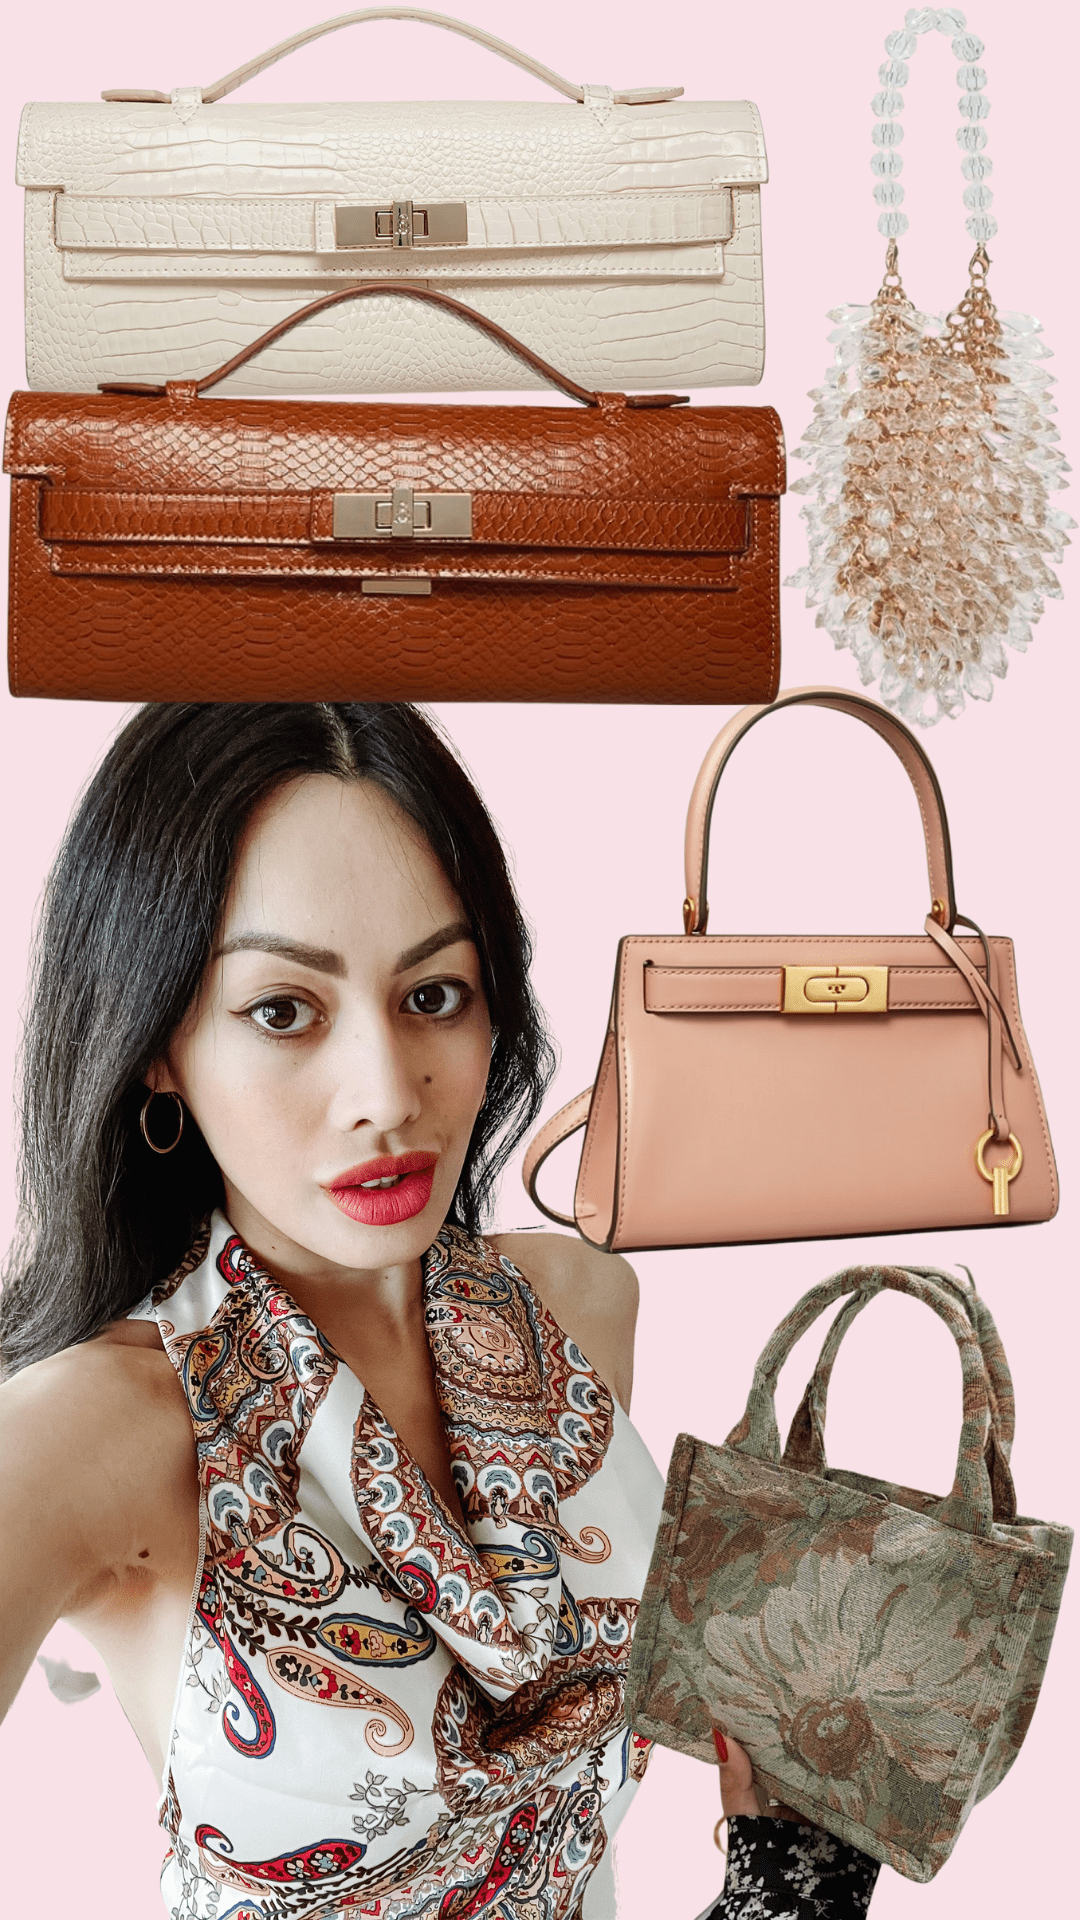 Essential Autumn bags to go with your fall outfit ideas